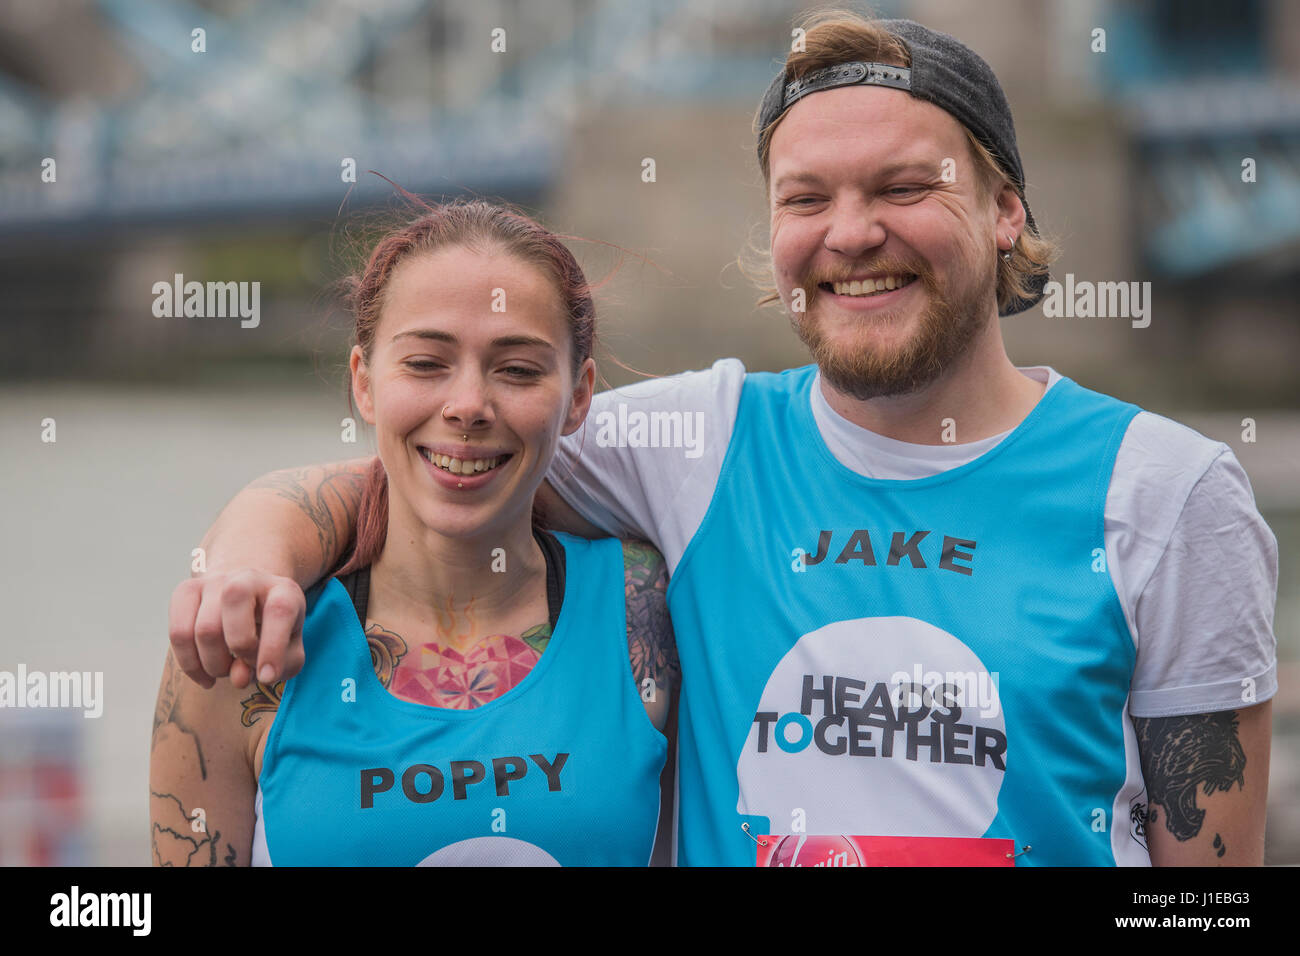 London, UK. 21st Apr, 2017. Poppy and Jake are running for Heads Together and suffer mental health issues which they hope to alleviate by training for the marathon… they have been part of a bbc program Mind Over Matter - special runners with a #ReasonToRun in the 2017 Virgin Money London Marathon Credit: Guy Bell/Alamy Live News Credit: Guy Bell/Alamy Live News Stock Photo